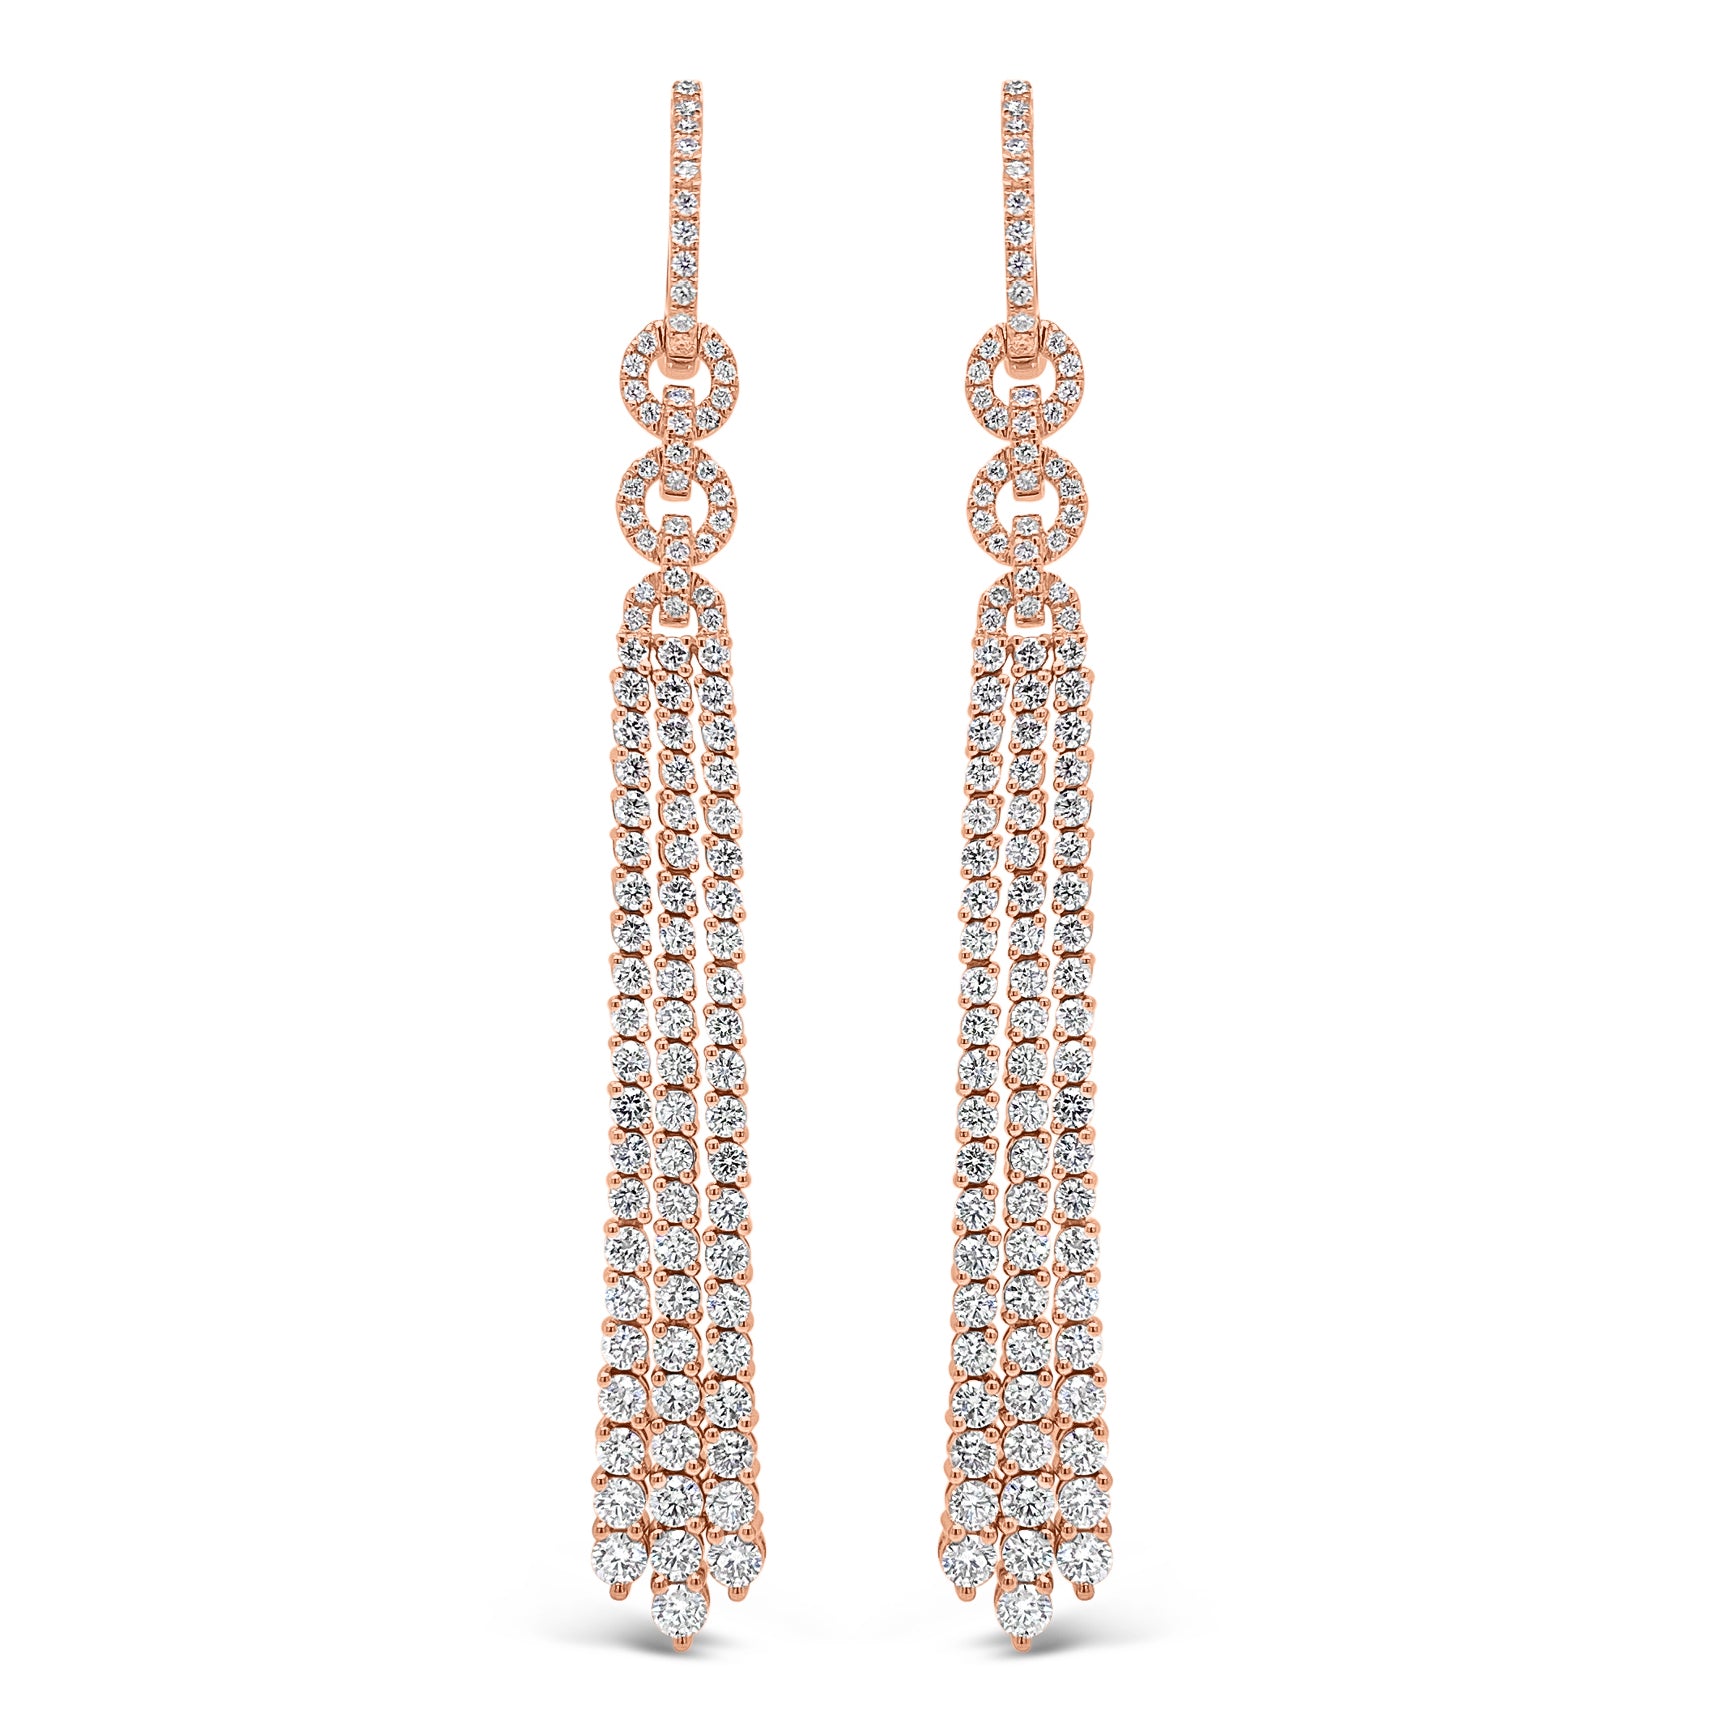 Diamond Double Link Tassel Earrings  - 18K gold weighing 15.87 grams  - 206 round diamonds totaling 4.41 carats